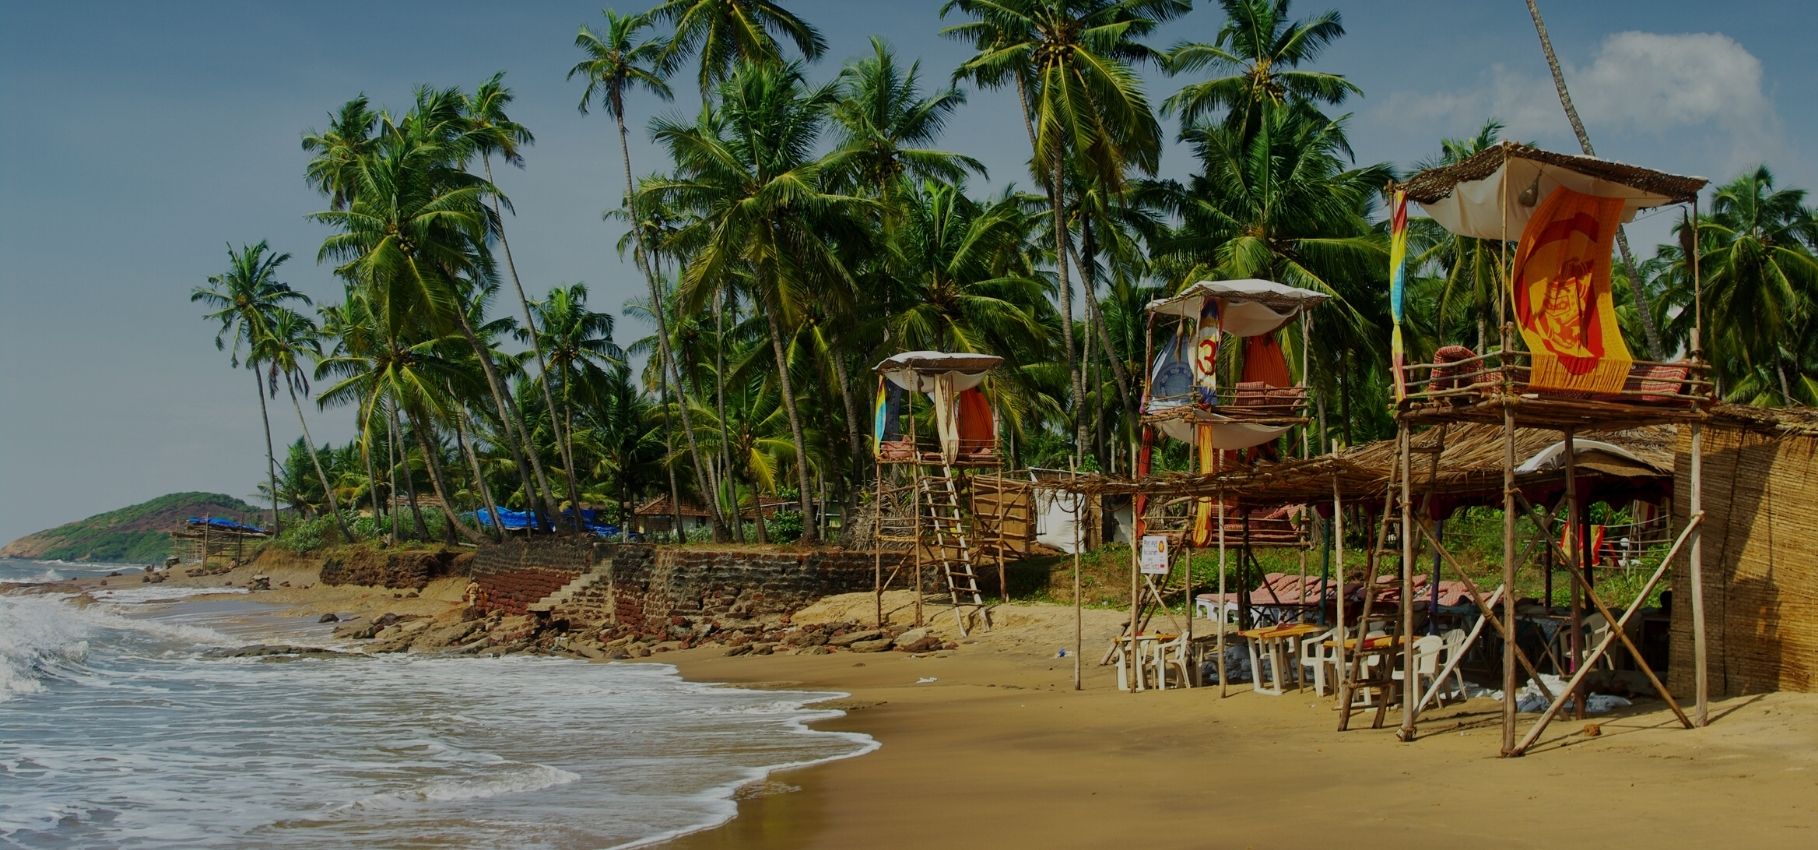 Places to visit in Goa, India